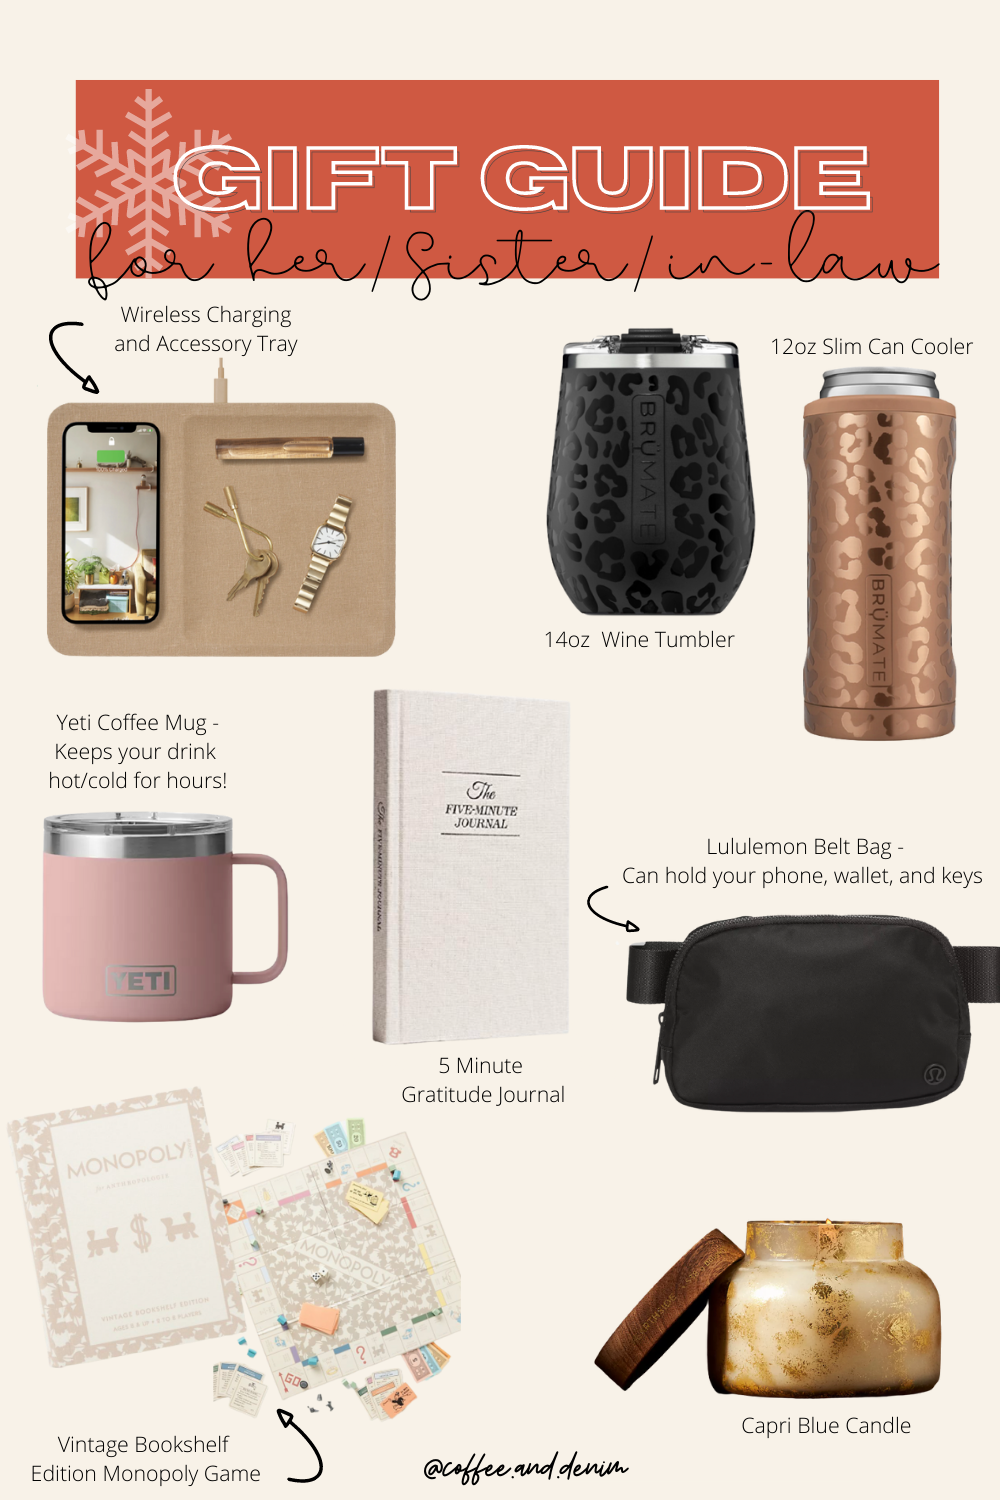 Holiday Gift Guides For the Family: Gift Ideas for Her